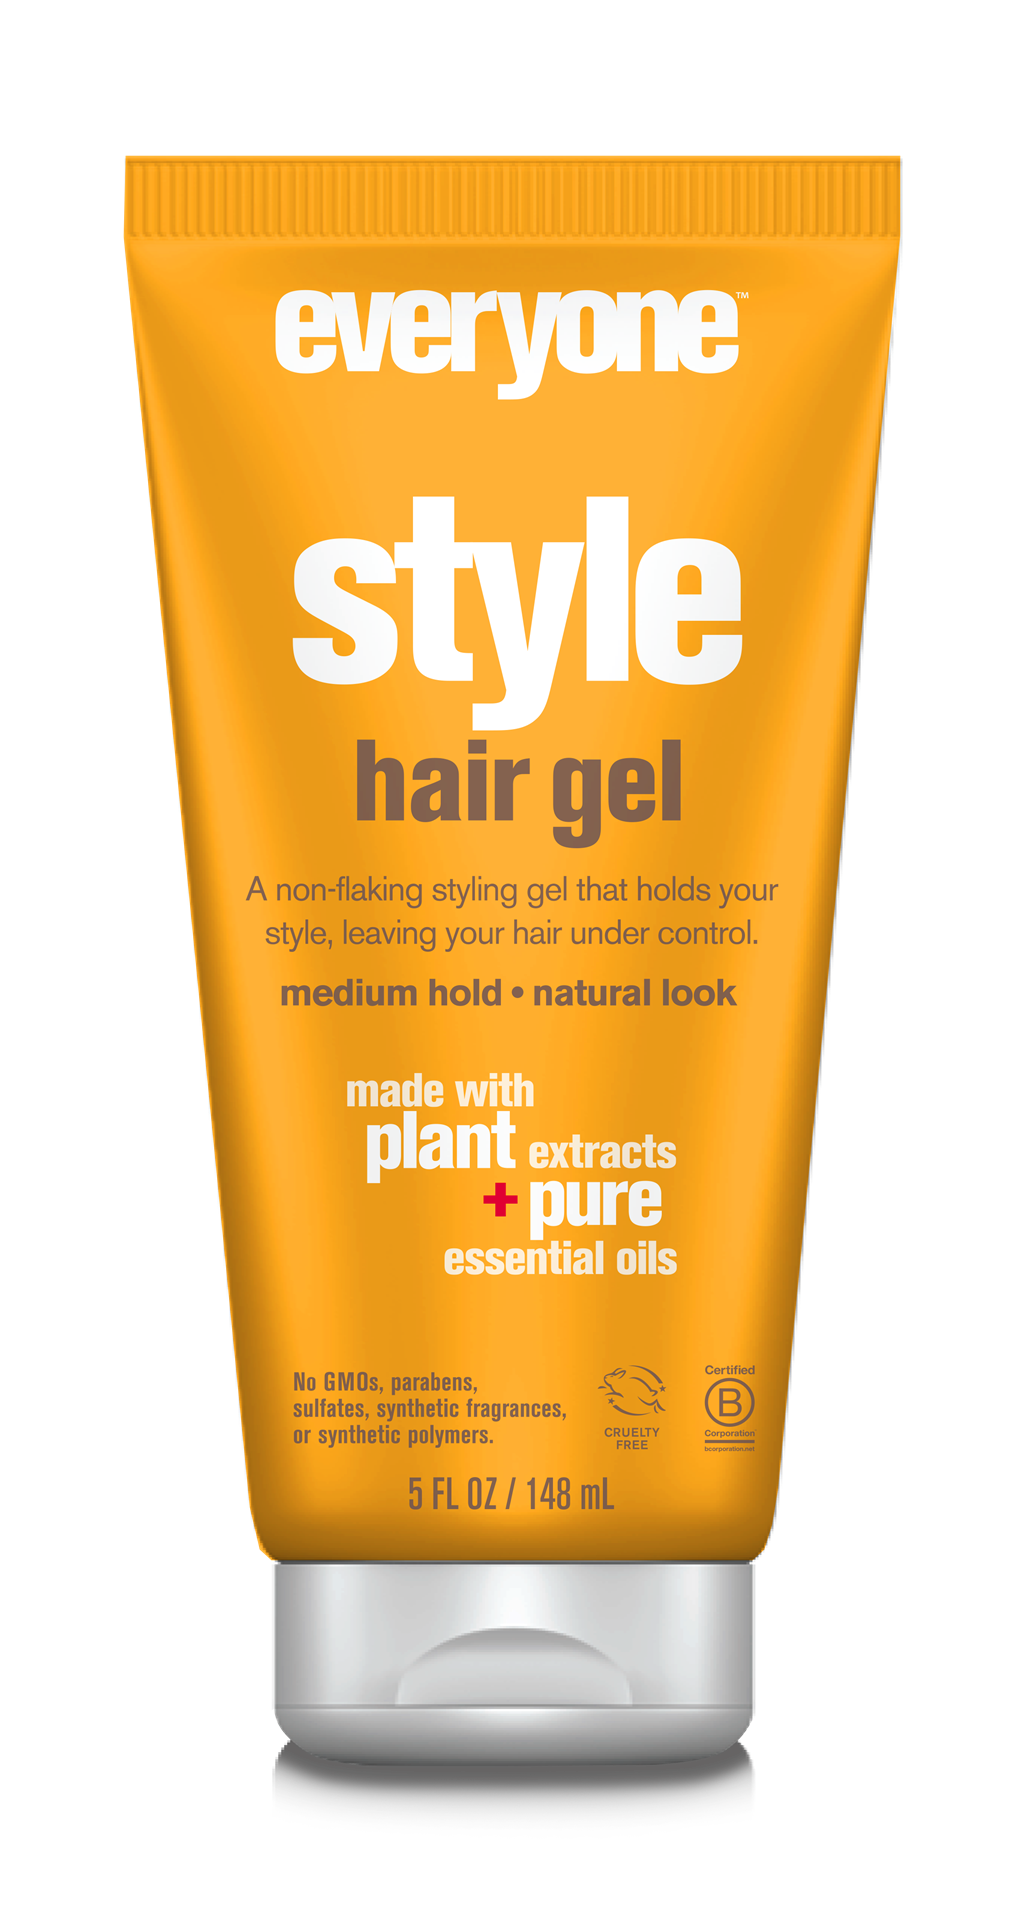 https://buywellmedia.s3.ca-central-1.amazonaws.com/images/thumbs/0008541_everyone-style-hair-gel-148ml.png